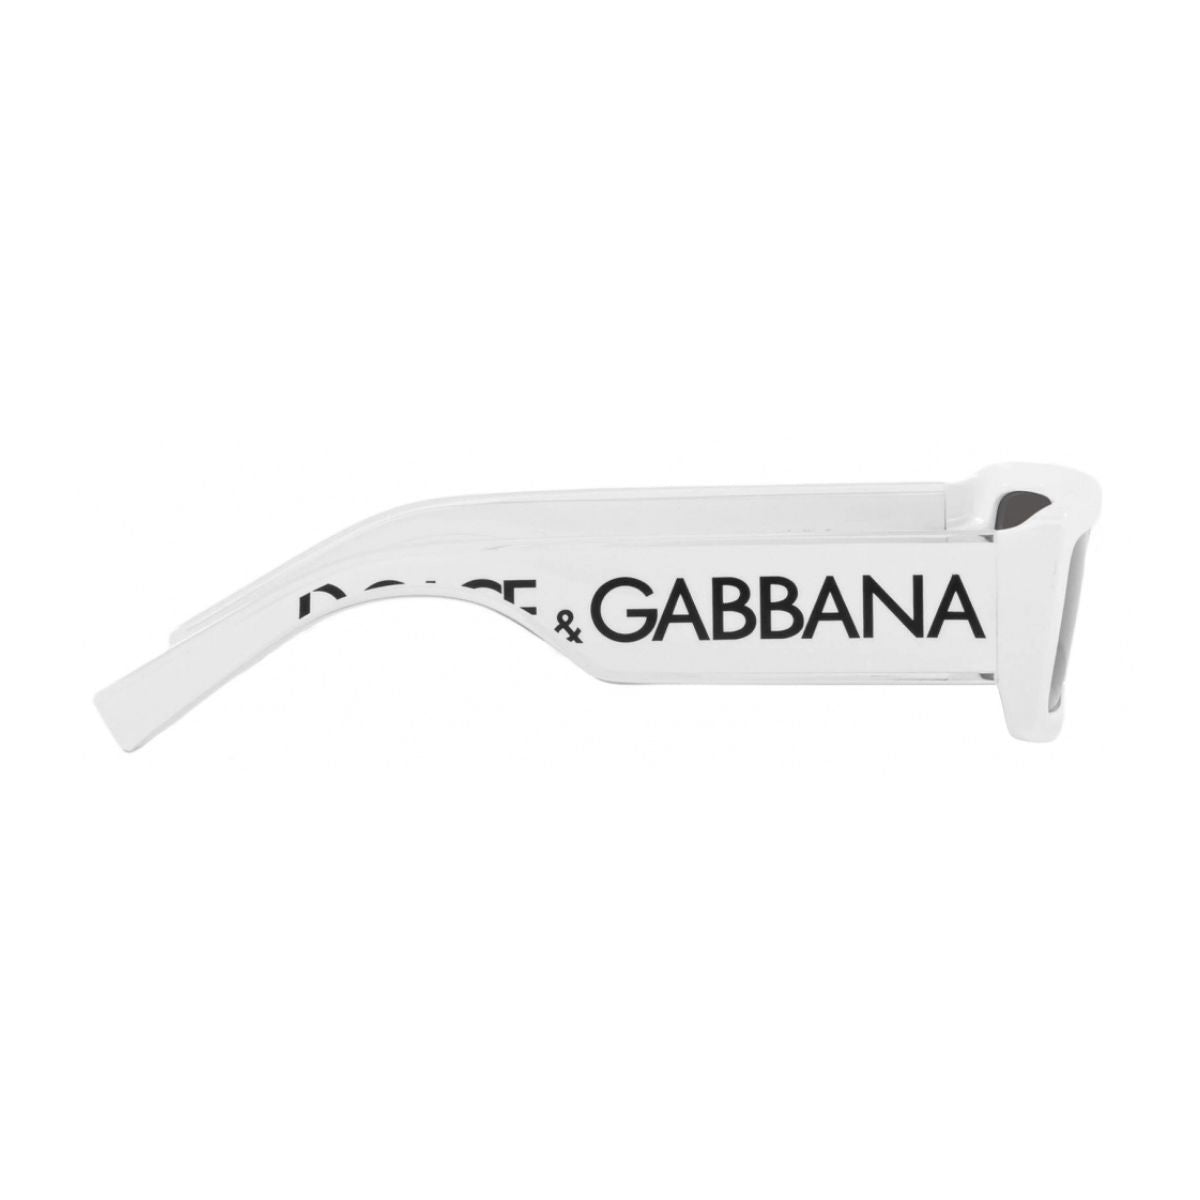 "Fashionable sunglasses by Dolce & Gabbana DG6187 3312/87, featuring UV protection, suitable for men and women."